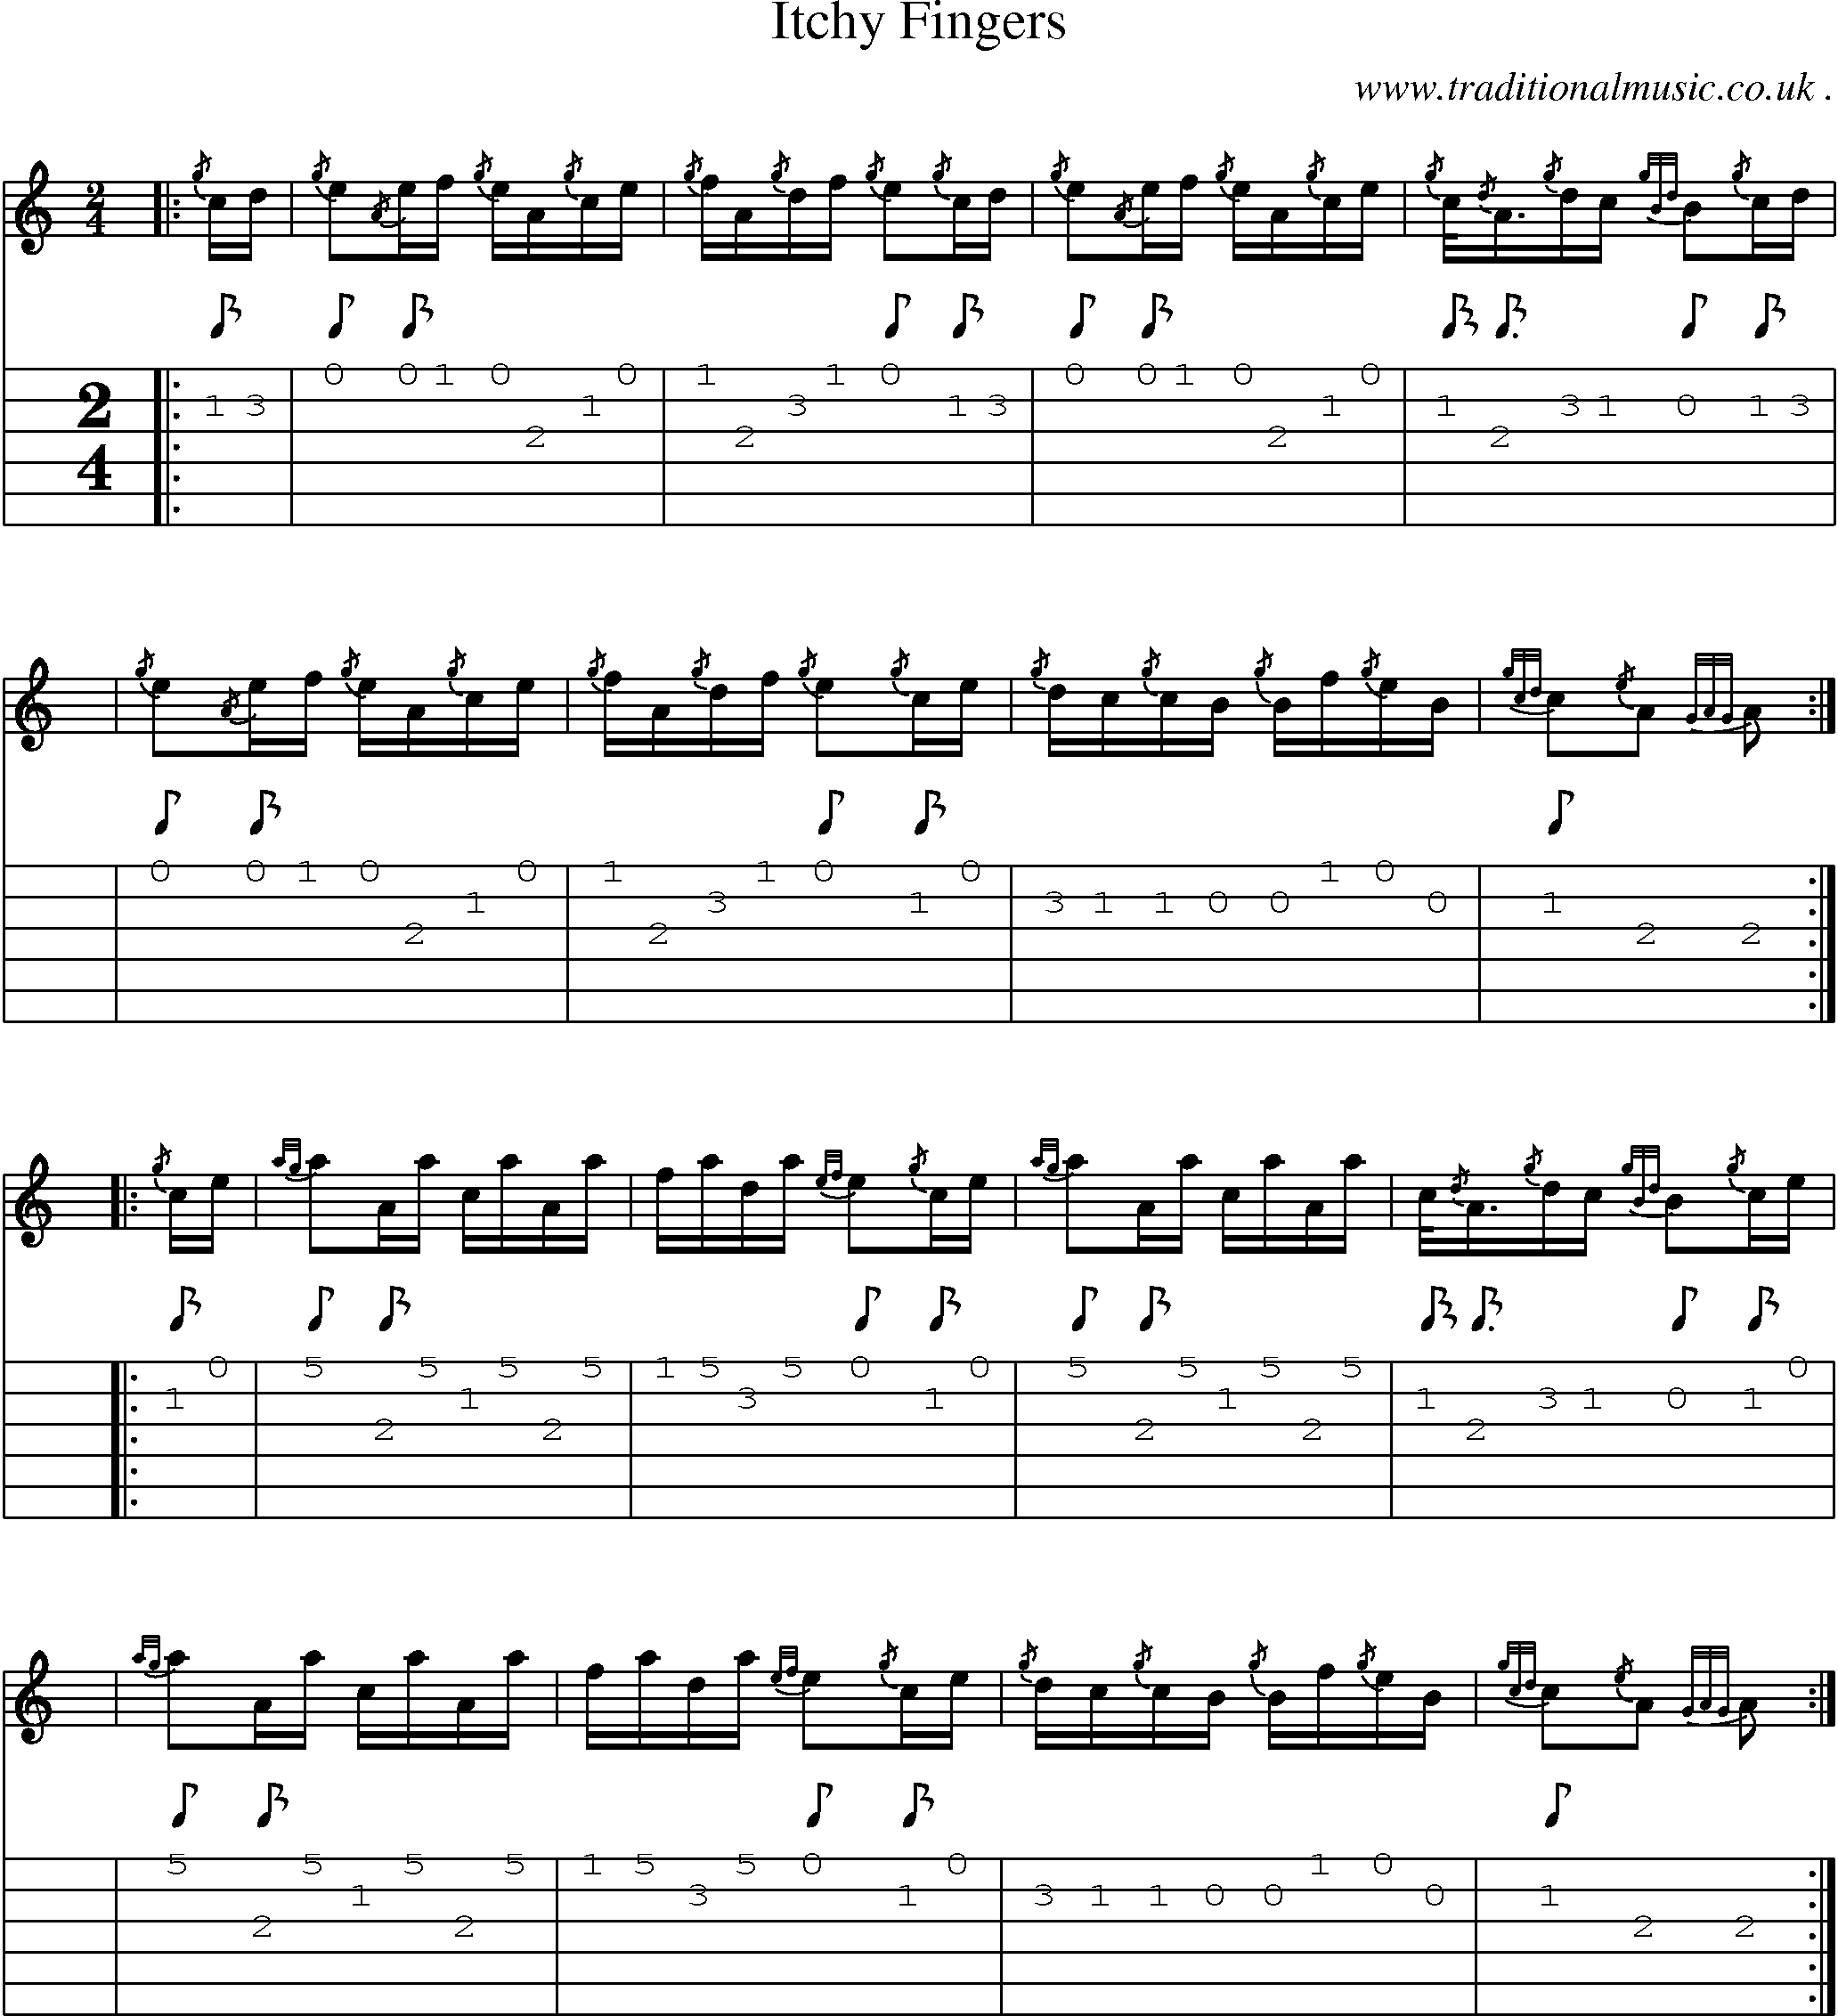 Sheet-music  score, Chords and Guitar Tabs for Itchy Fingers